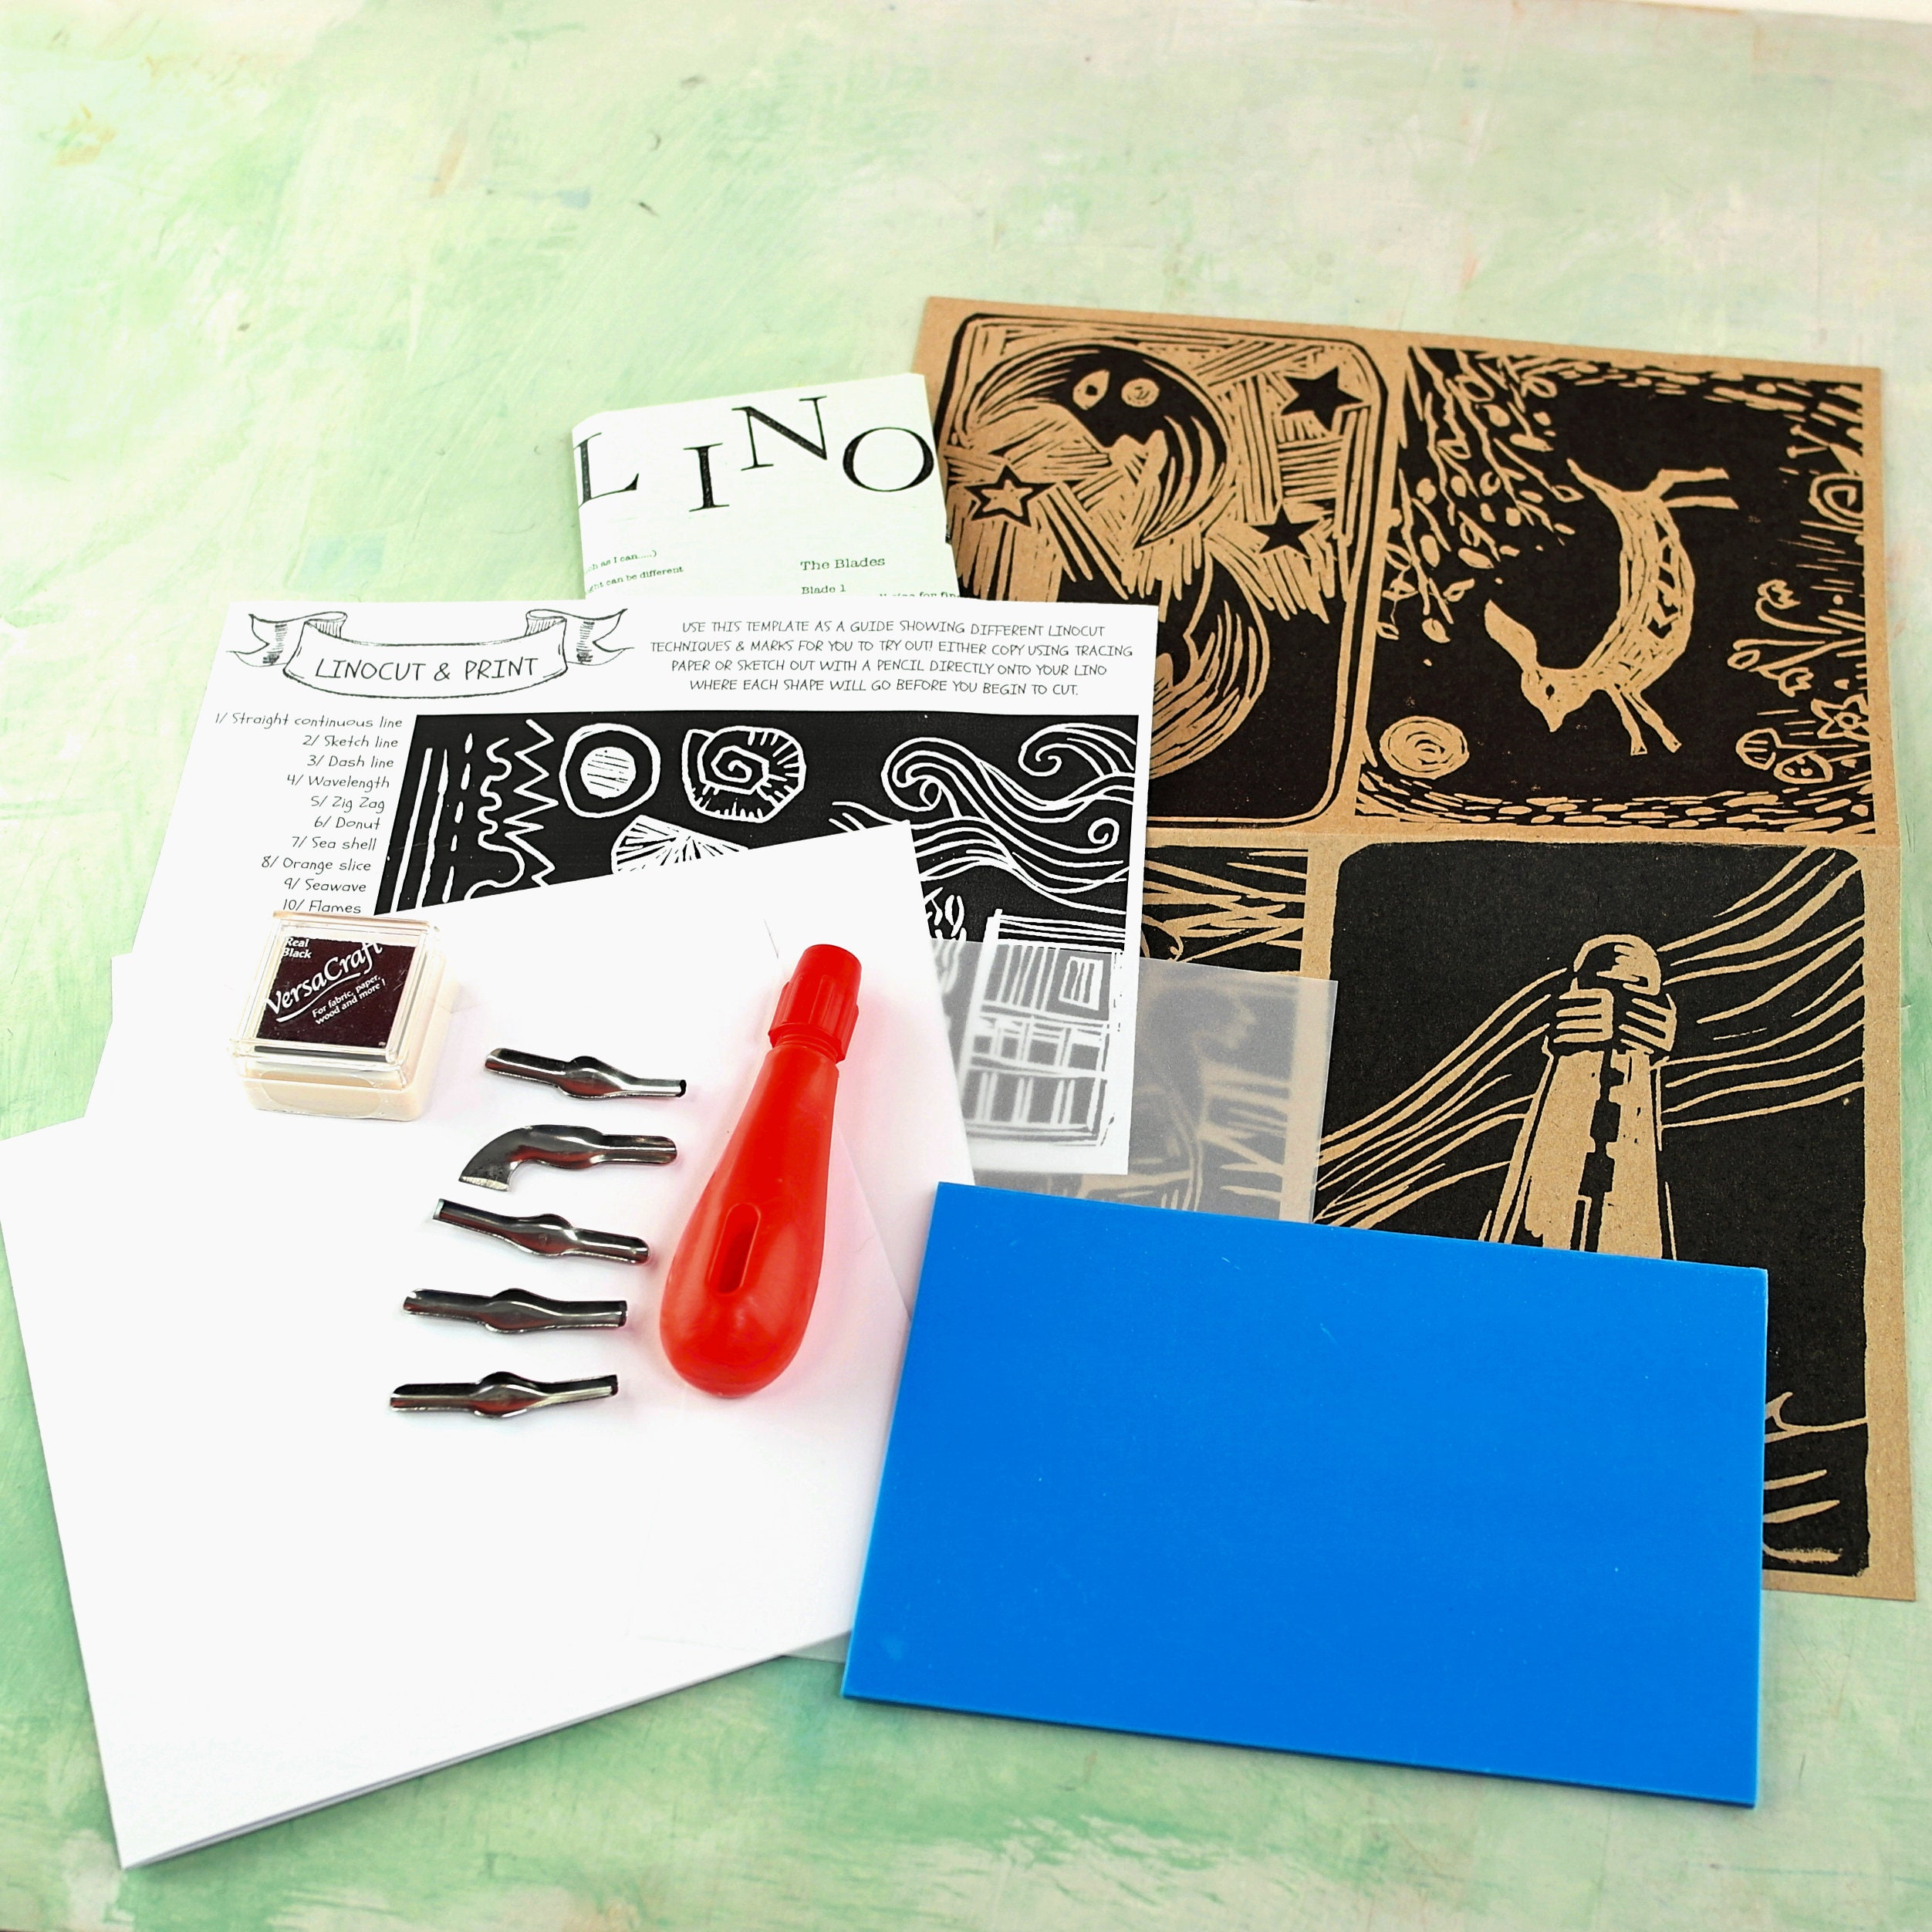  ESSDEE Block Printing Essentials Kit Includes 2 Ink Rollers, 3  Lino Cutters, Lino Handle, Printing Ink and Carving Block, Used in Art,  Craft and Carving Stamps